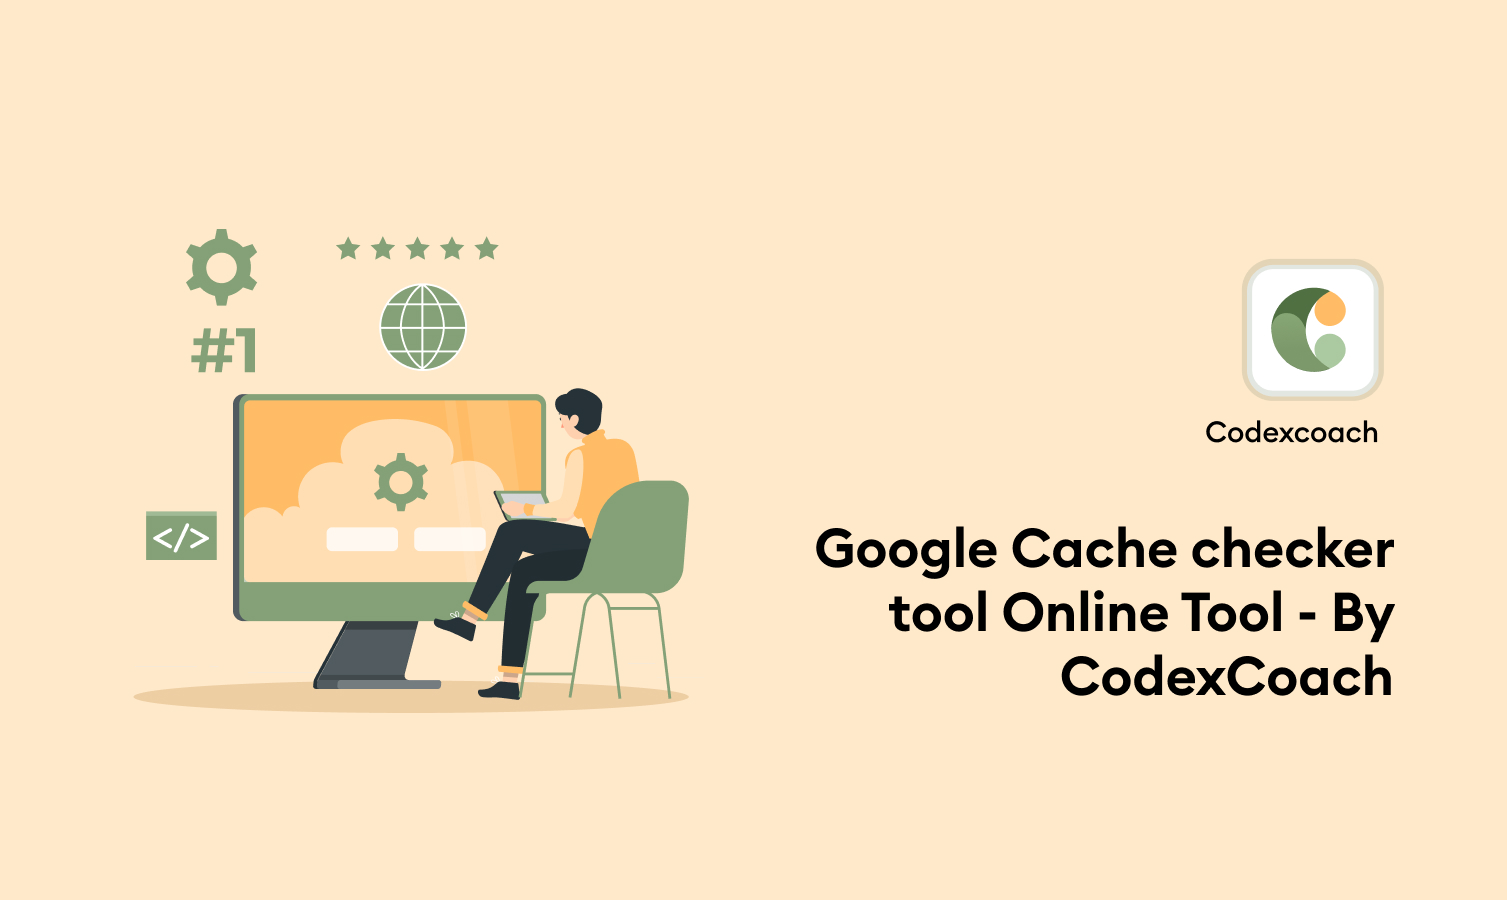 Google Cache checker tool Online Tool - By CodexCoach (1)